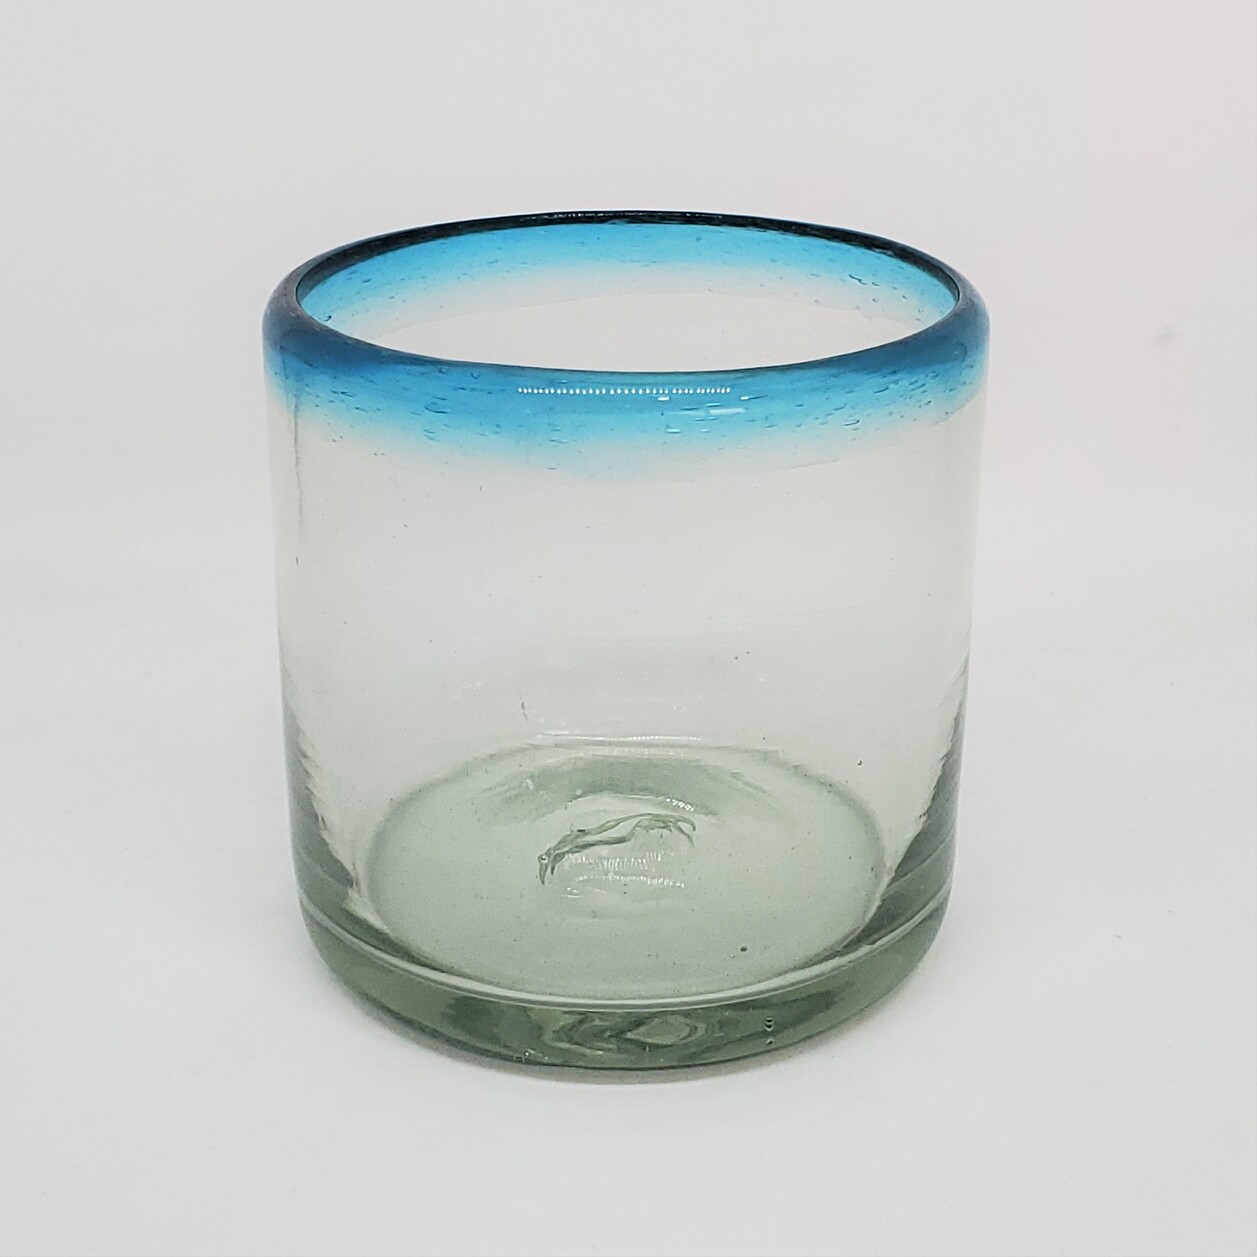 Wholesale MEXICAN GLASSWARE / Aqua Blue Rim 8 oz DOF Rock Glasses  / These glasses are just the right size to enjoy fresh squeezed fruit juice in the moning.